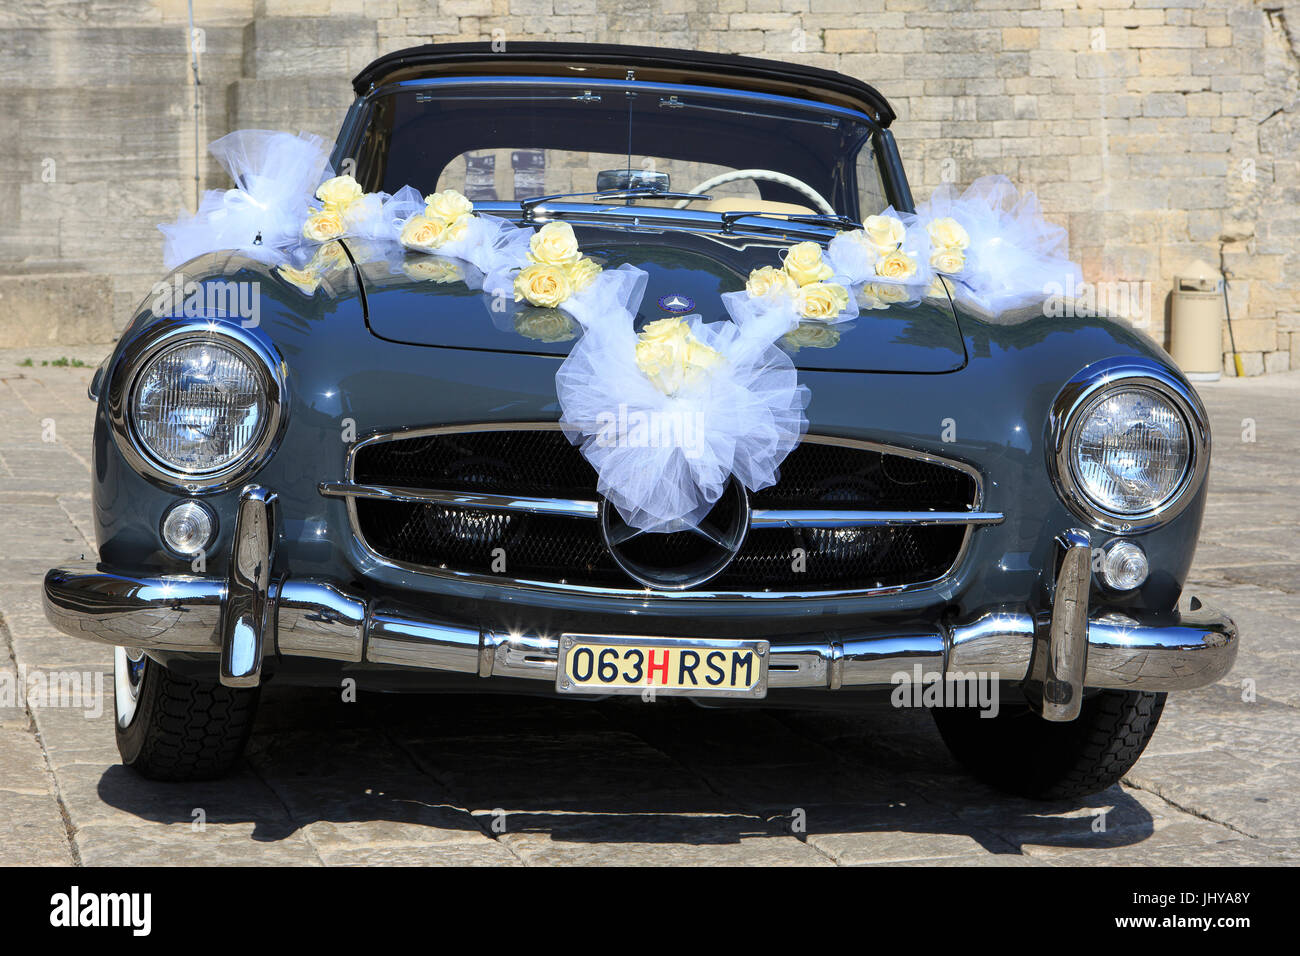 A Mercedes-Benz Gullwing 300SL with San Marino license plate used for a wedding outside the Basilica of San Marino Stock Photo